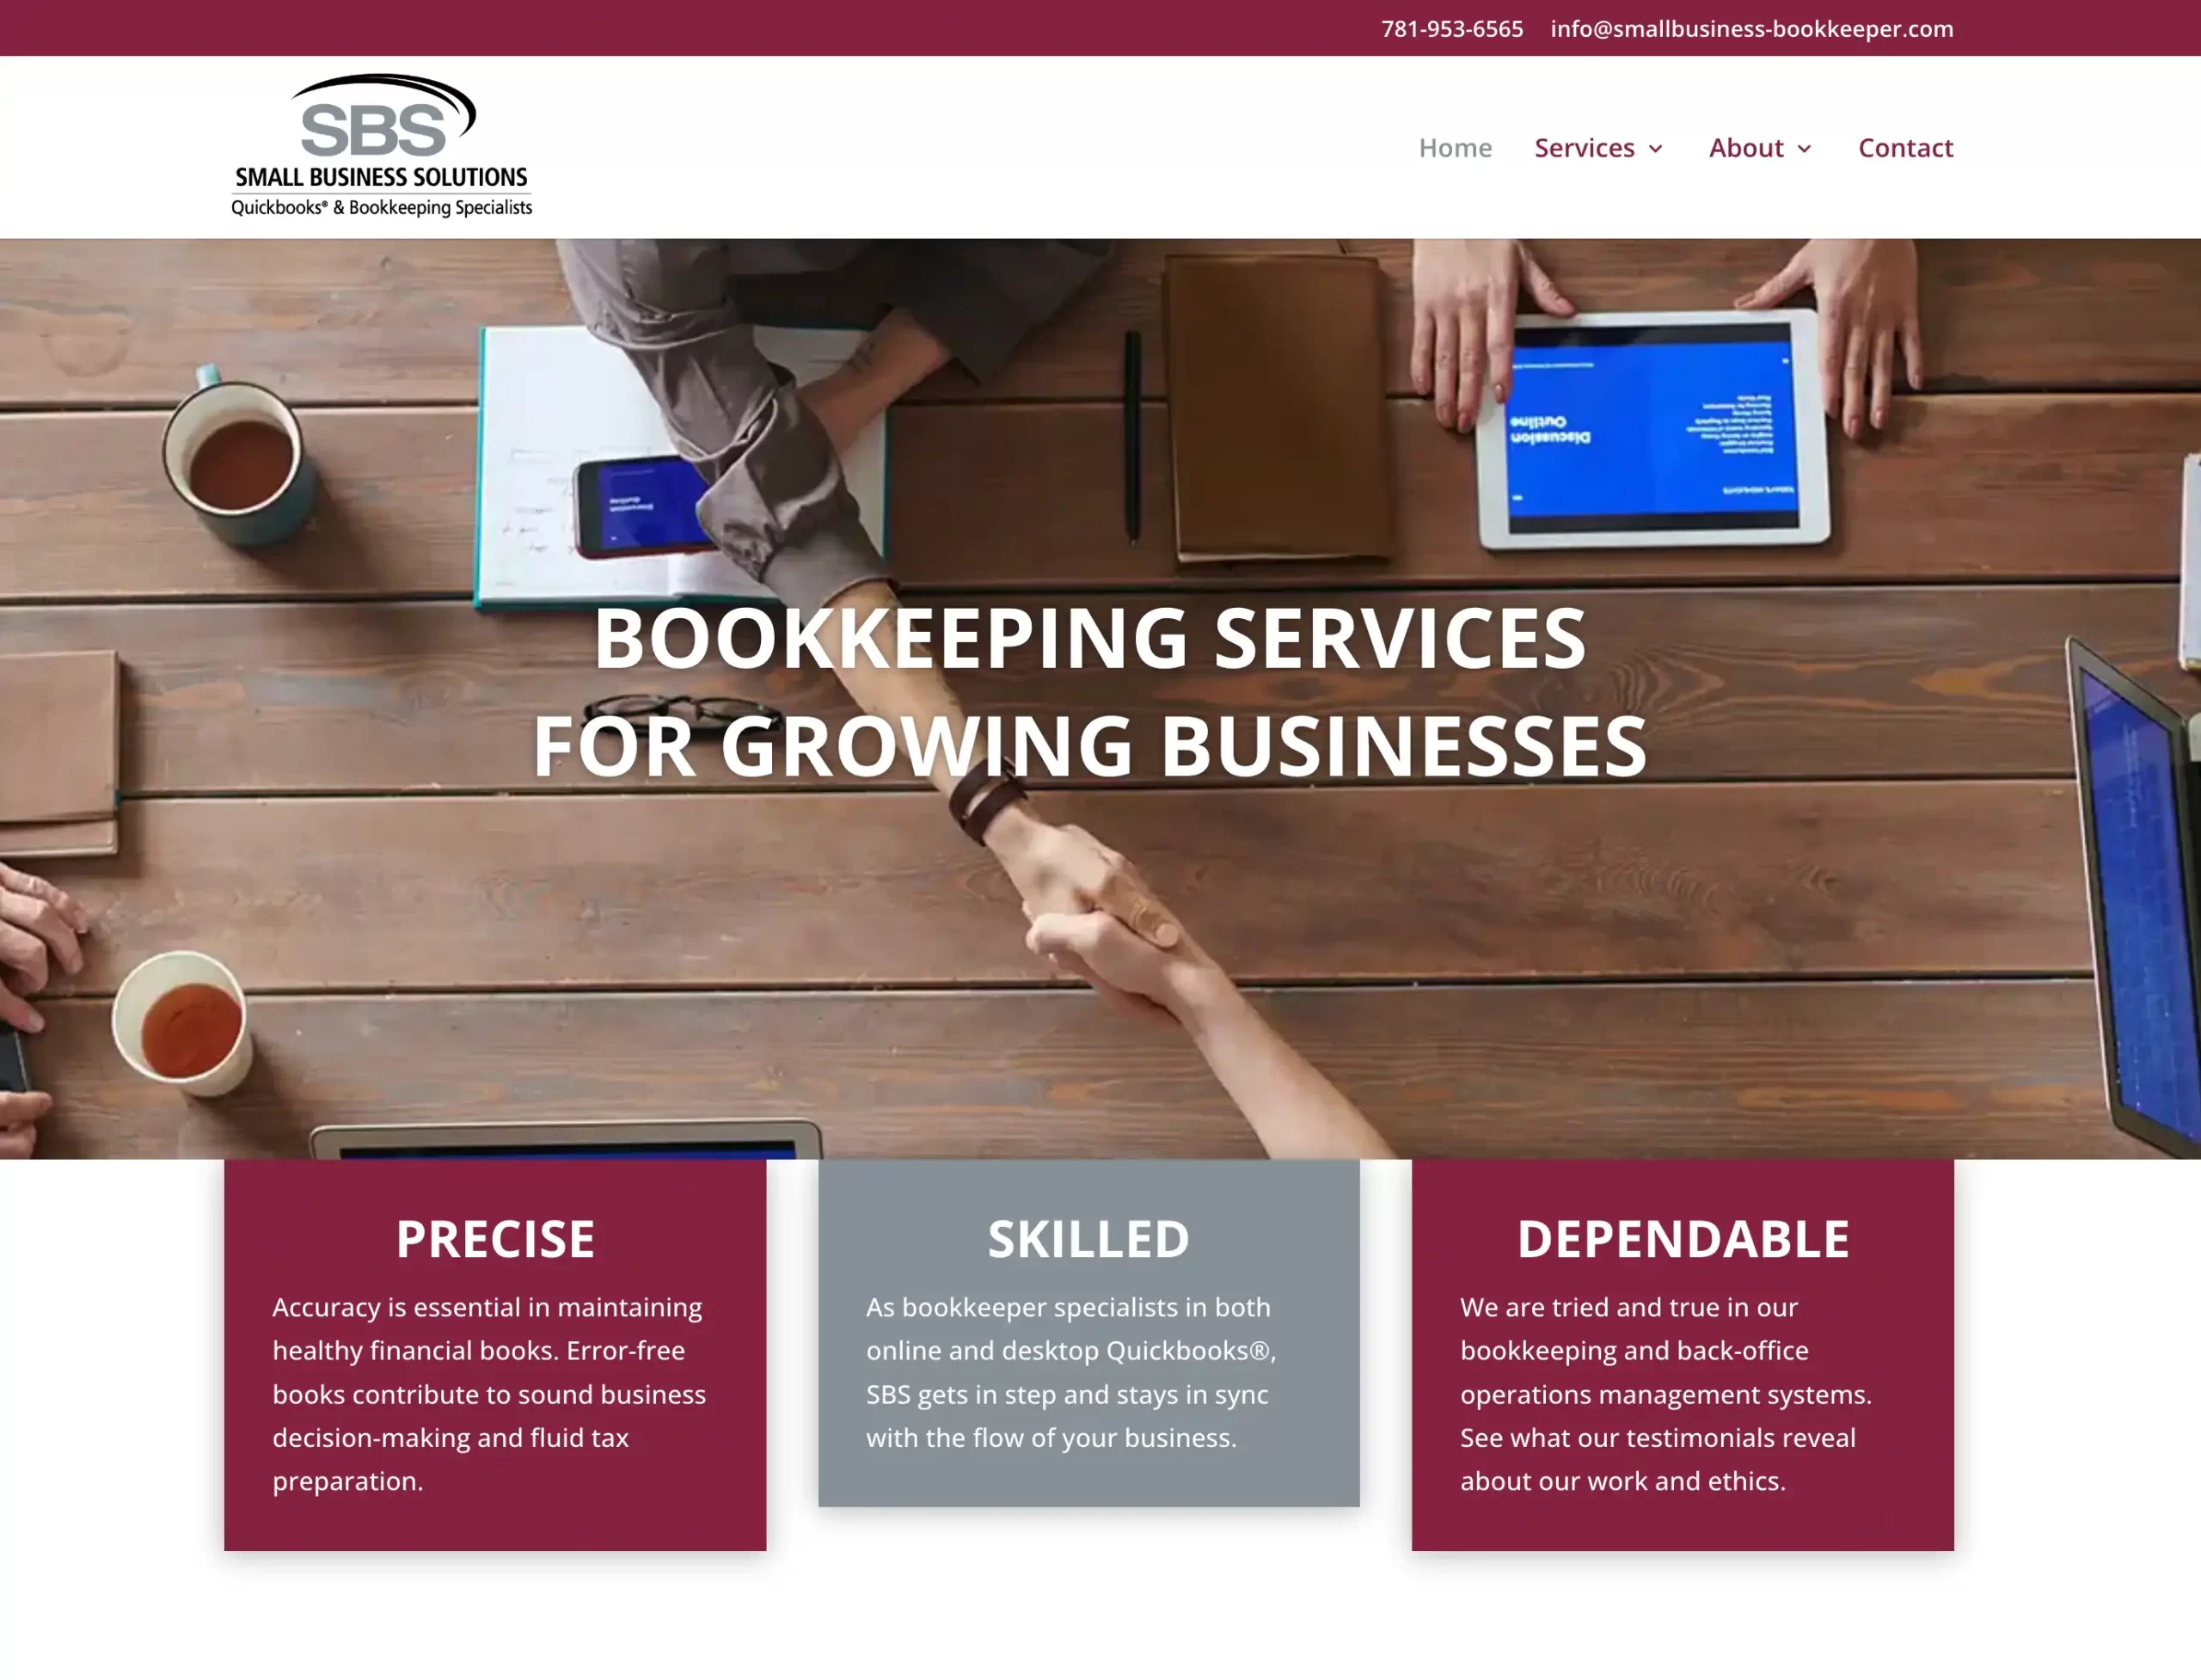 Small Business Solutions Book Keeper, home page website